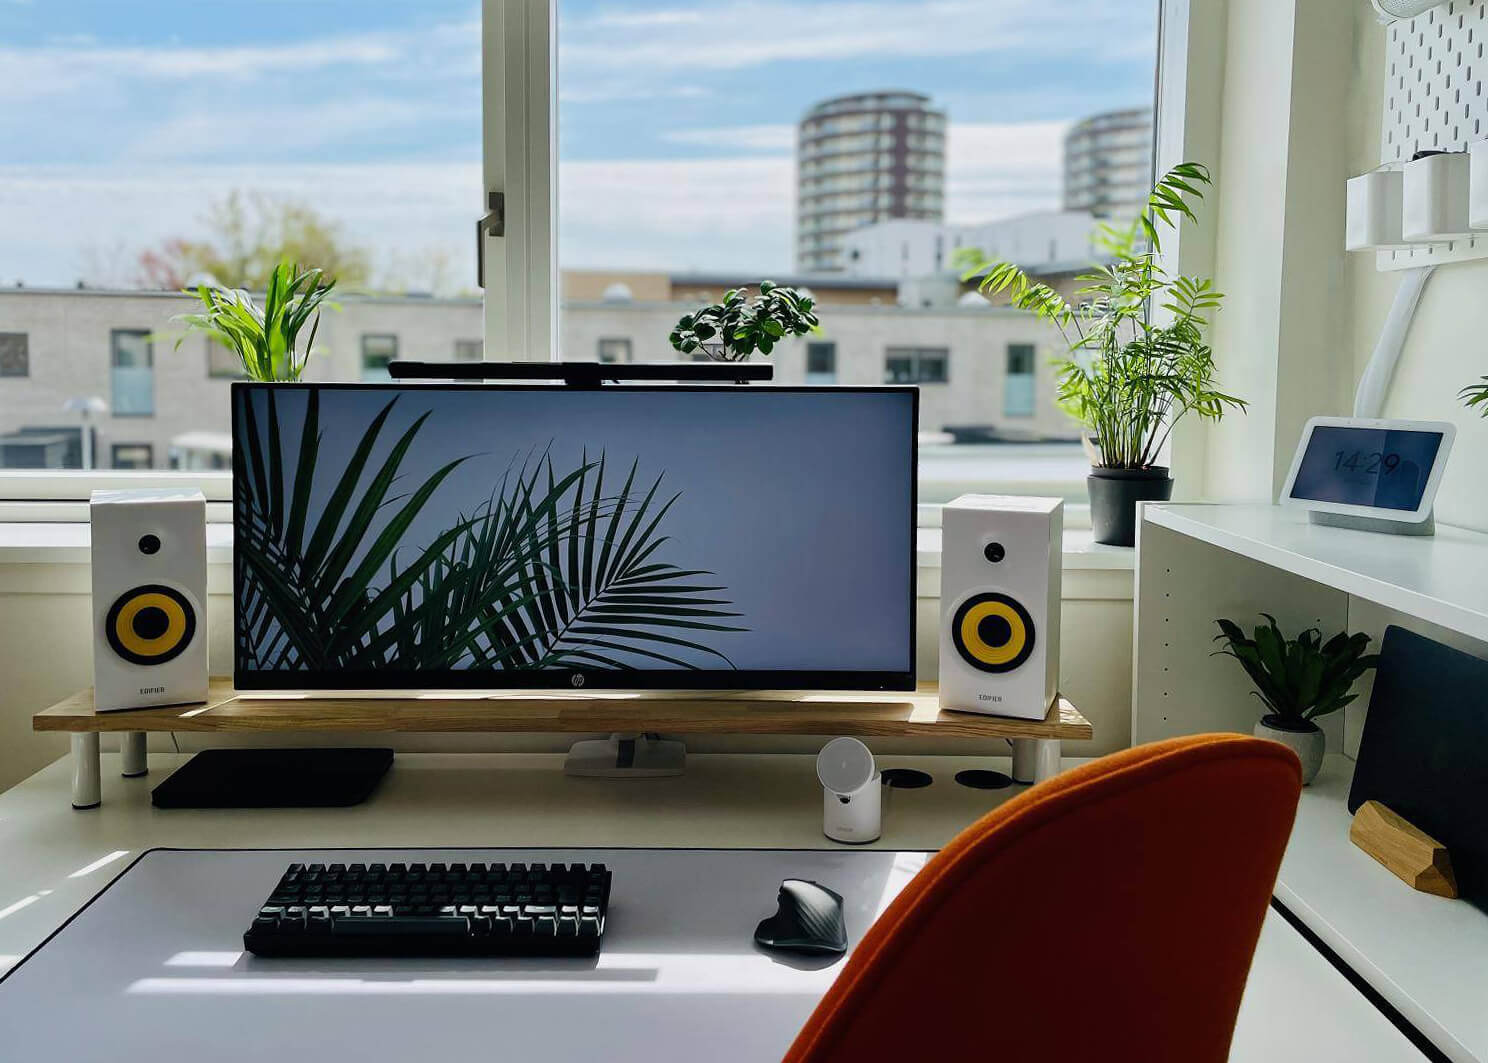 A minimal desk setup that serves for working from home and gaming